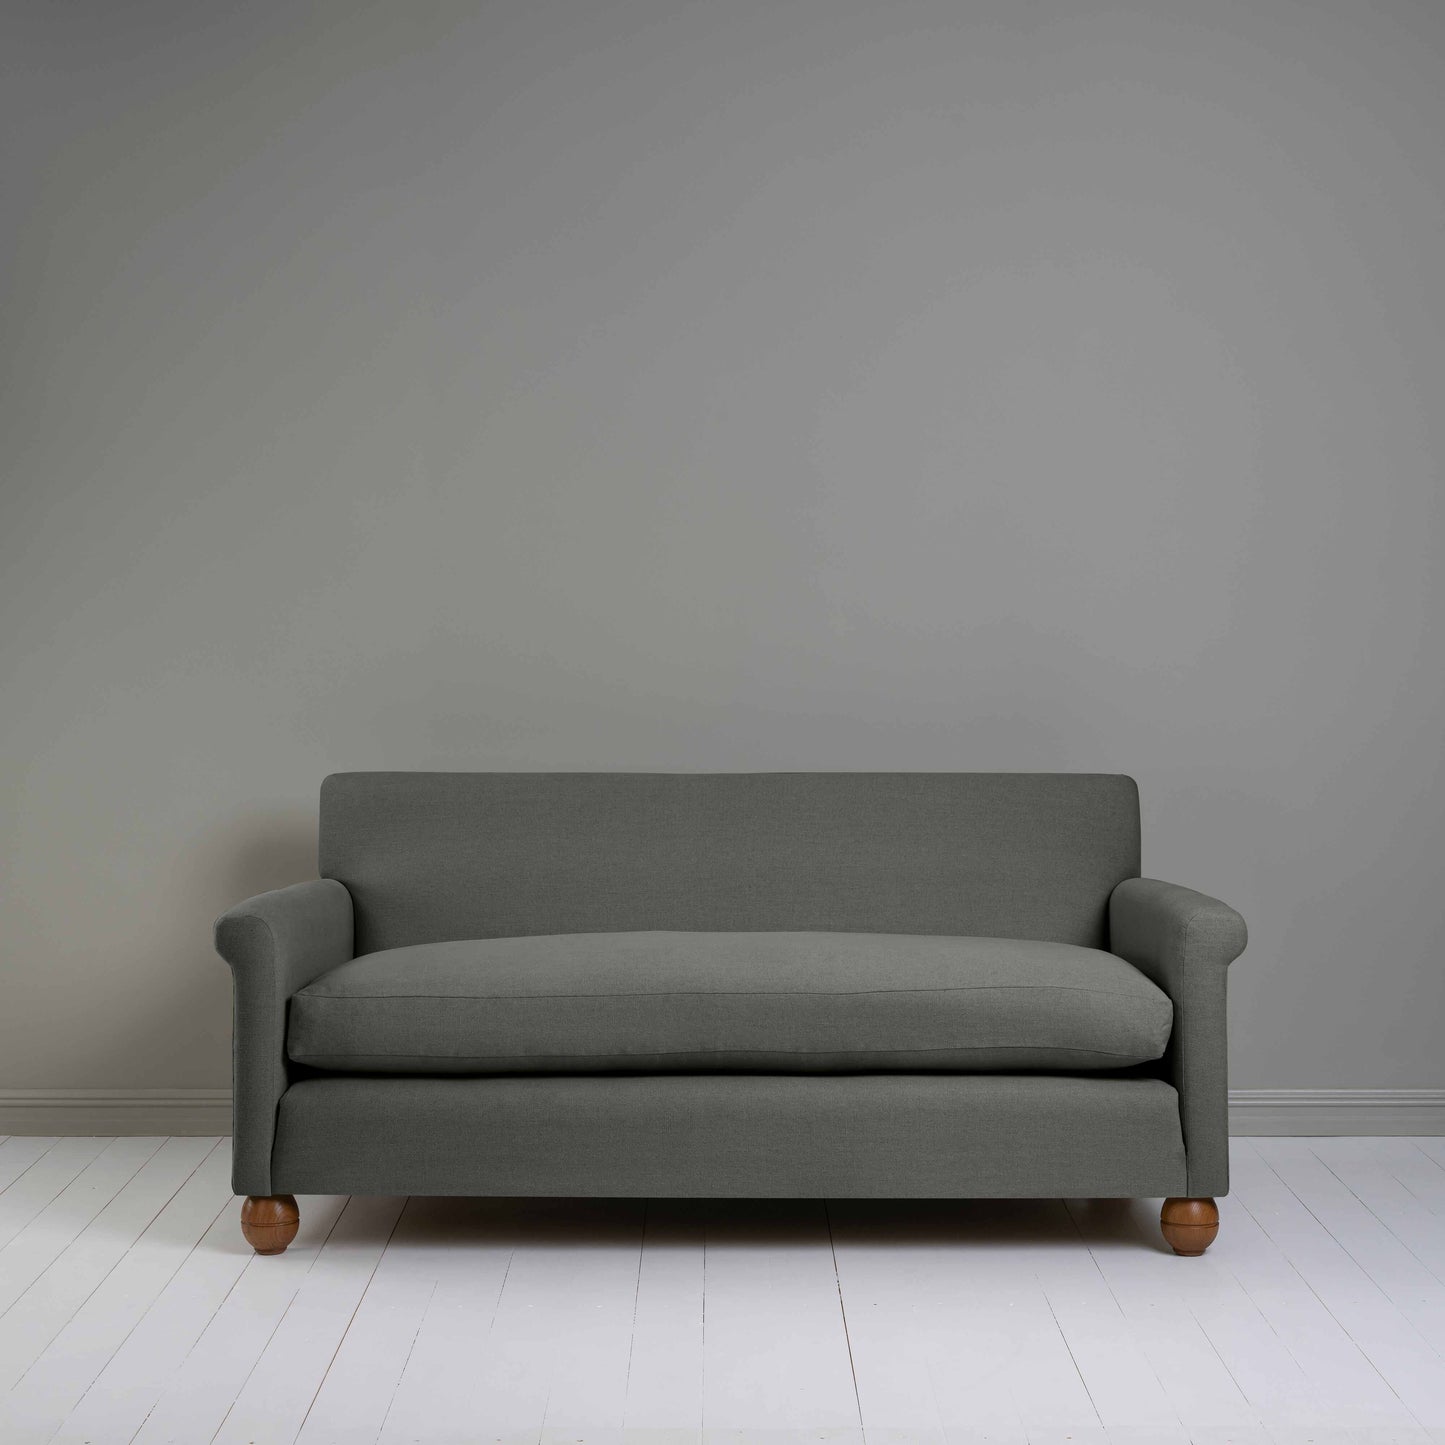 Idler 3 Seater Sofa in Laidback Linen Shadow